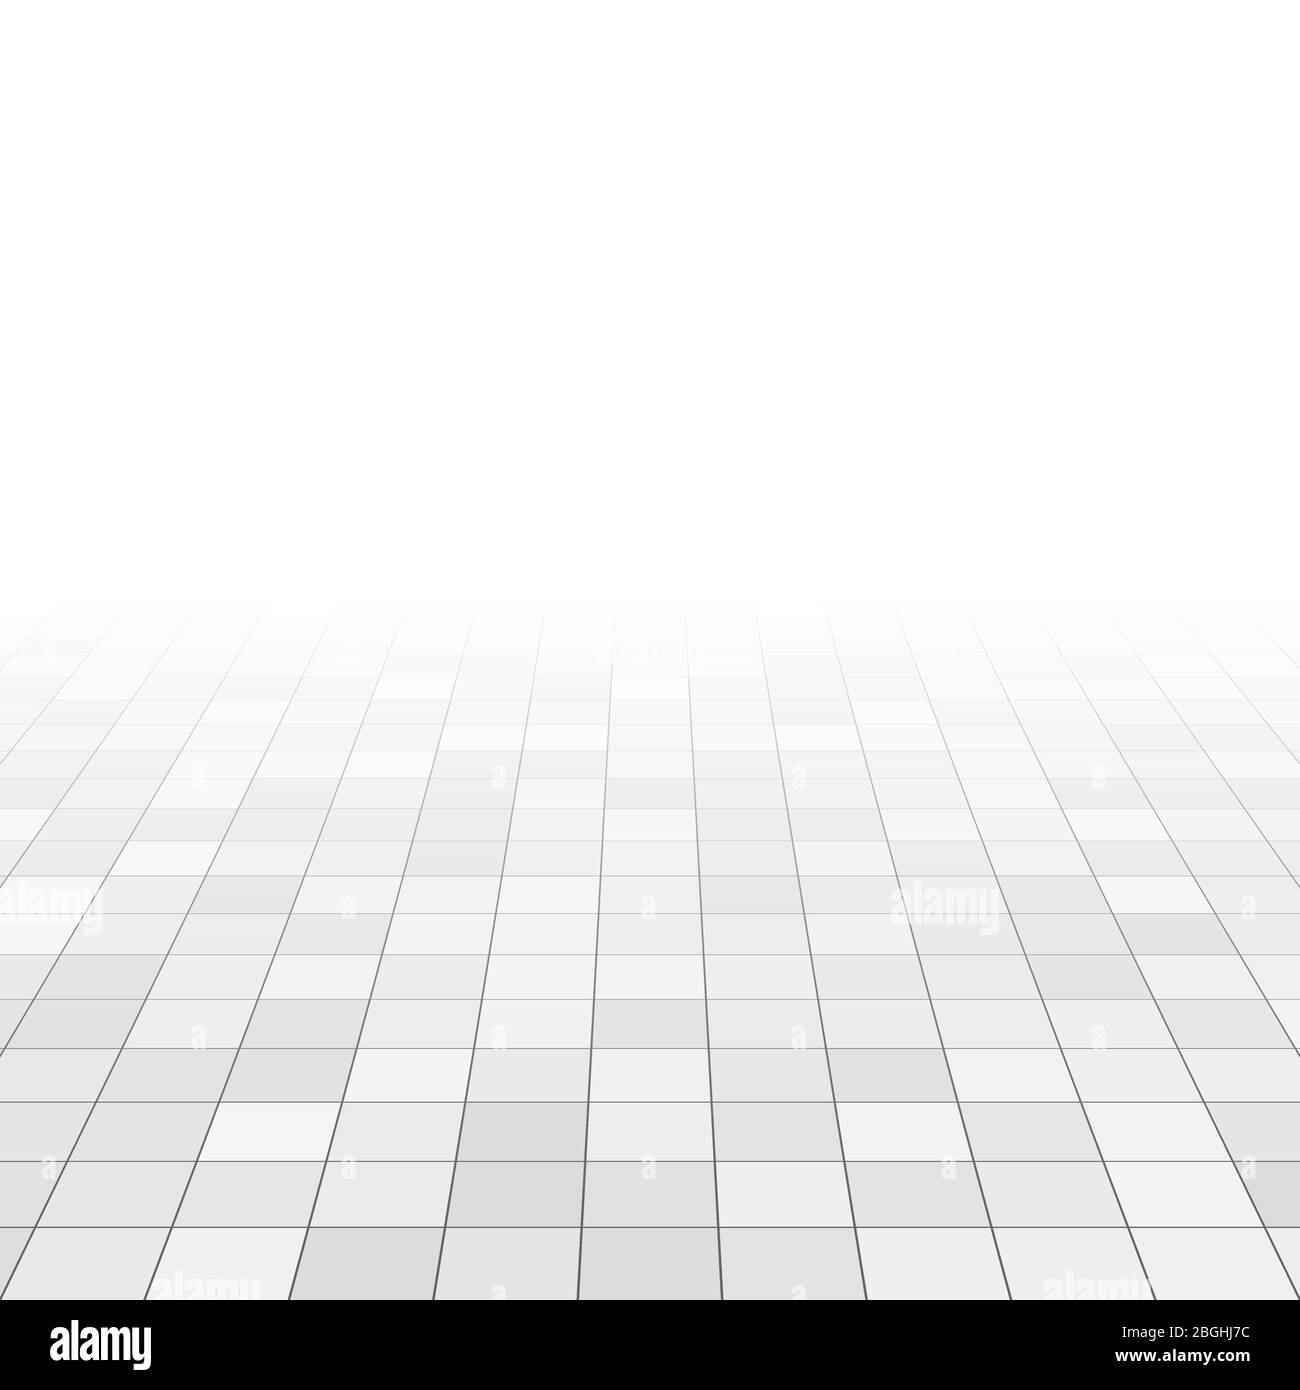 White and gray marble tiles on bathroom floor. Rectangle tiles in perspective grid. Abstract vector background. Surface square ceramic tile texture illustration Stock Vector